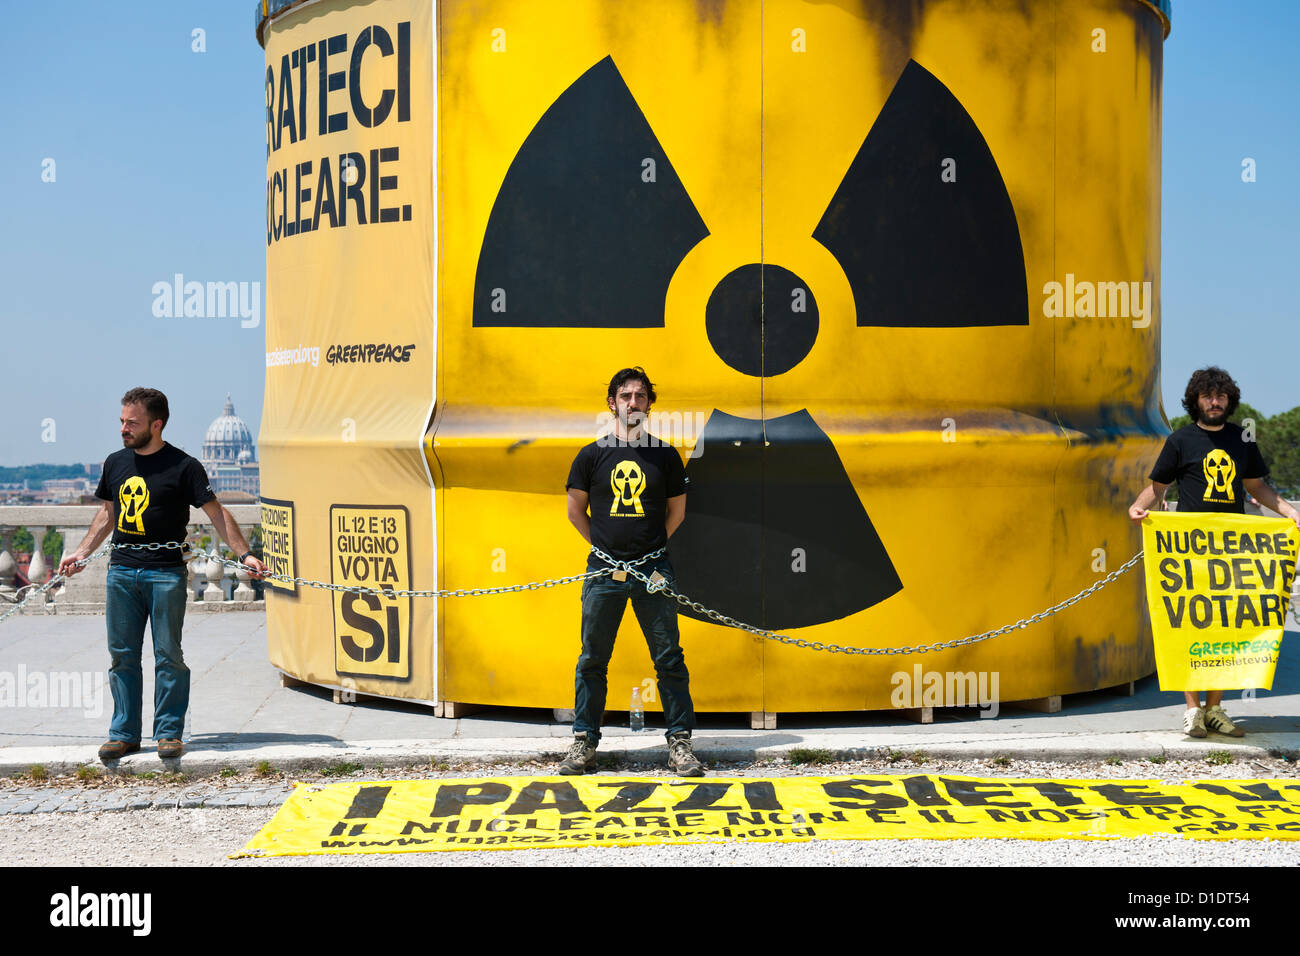 Anti-nuclear protesters on Pincian Hill, Rome Stock Photo